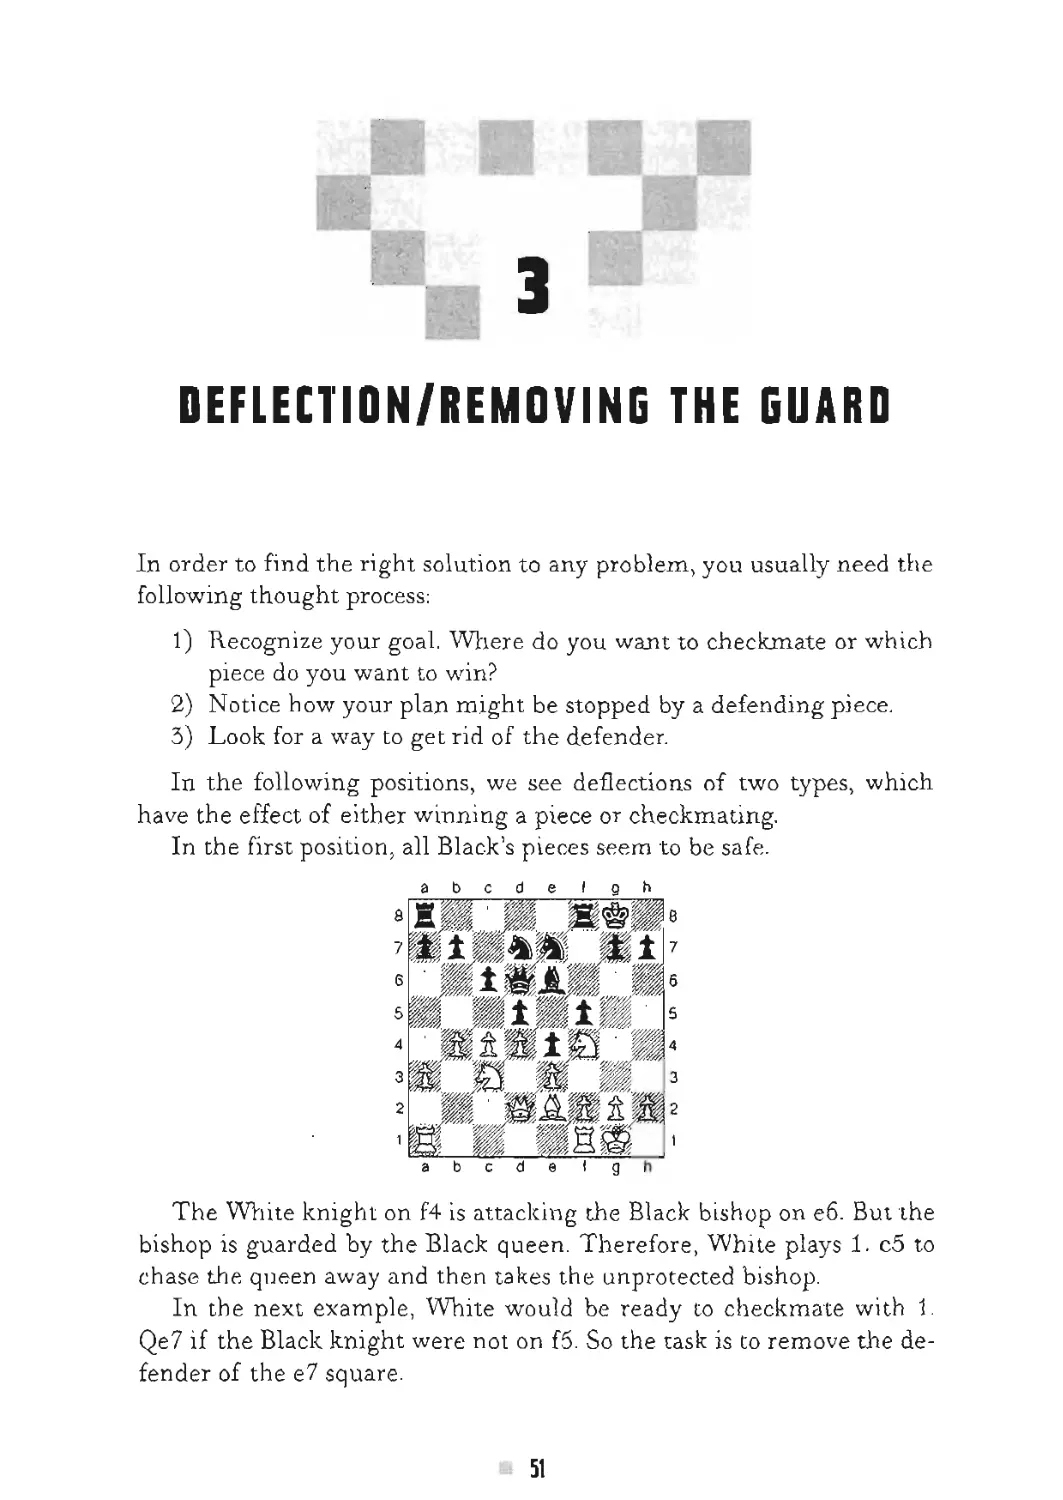 03 Deflection / removing the guard